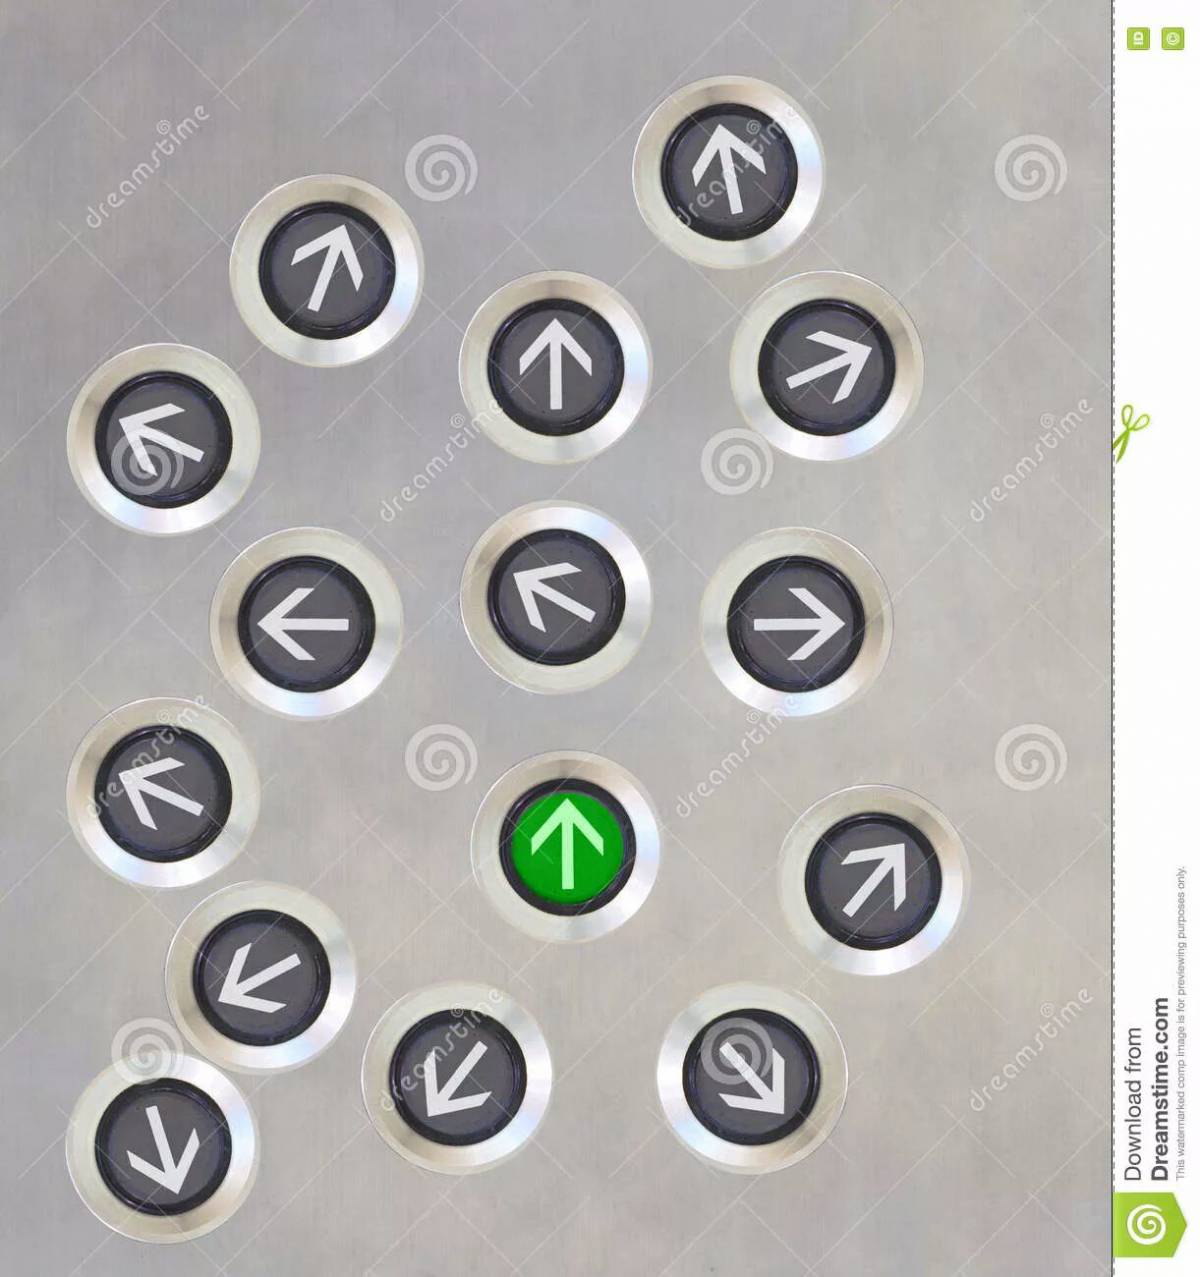 Elevator buttons #12